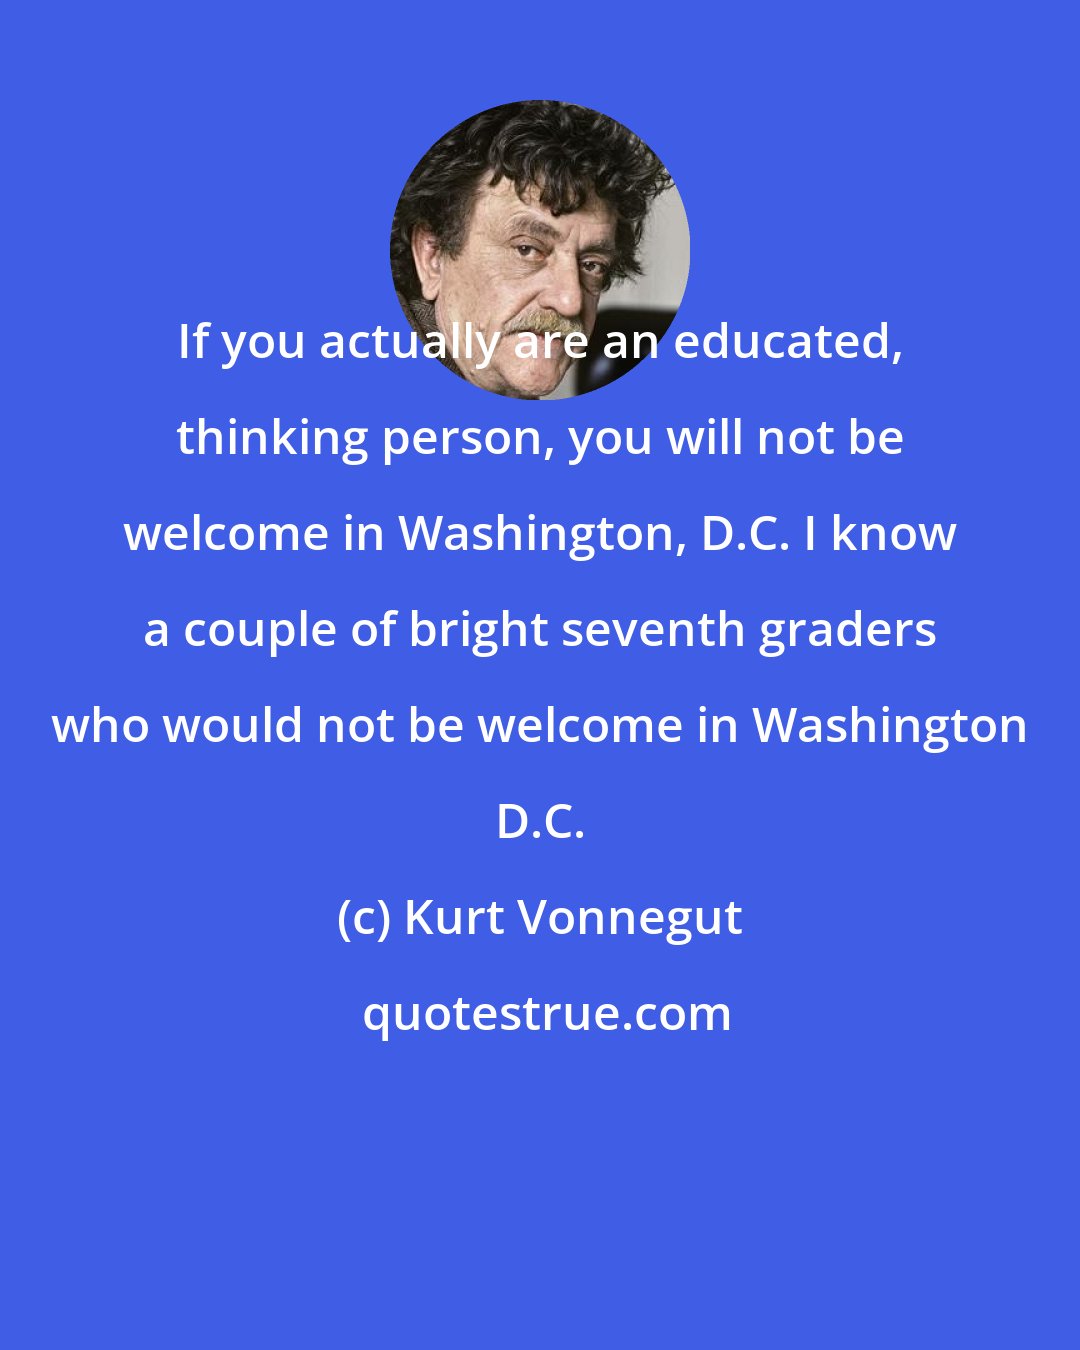 Kurt Vonnegut: If you actually are an educated, thinking person, you will not be welcome in Washington, D.C. I know a couple of bright seventh graders who would not be welcome in Washington D.C.